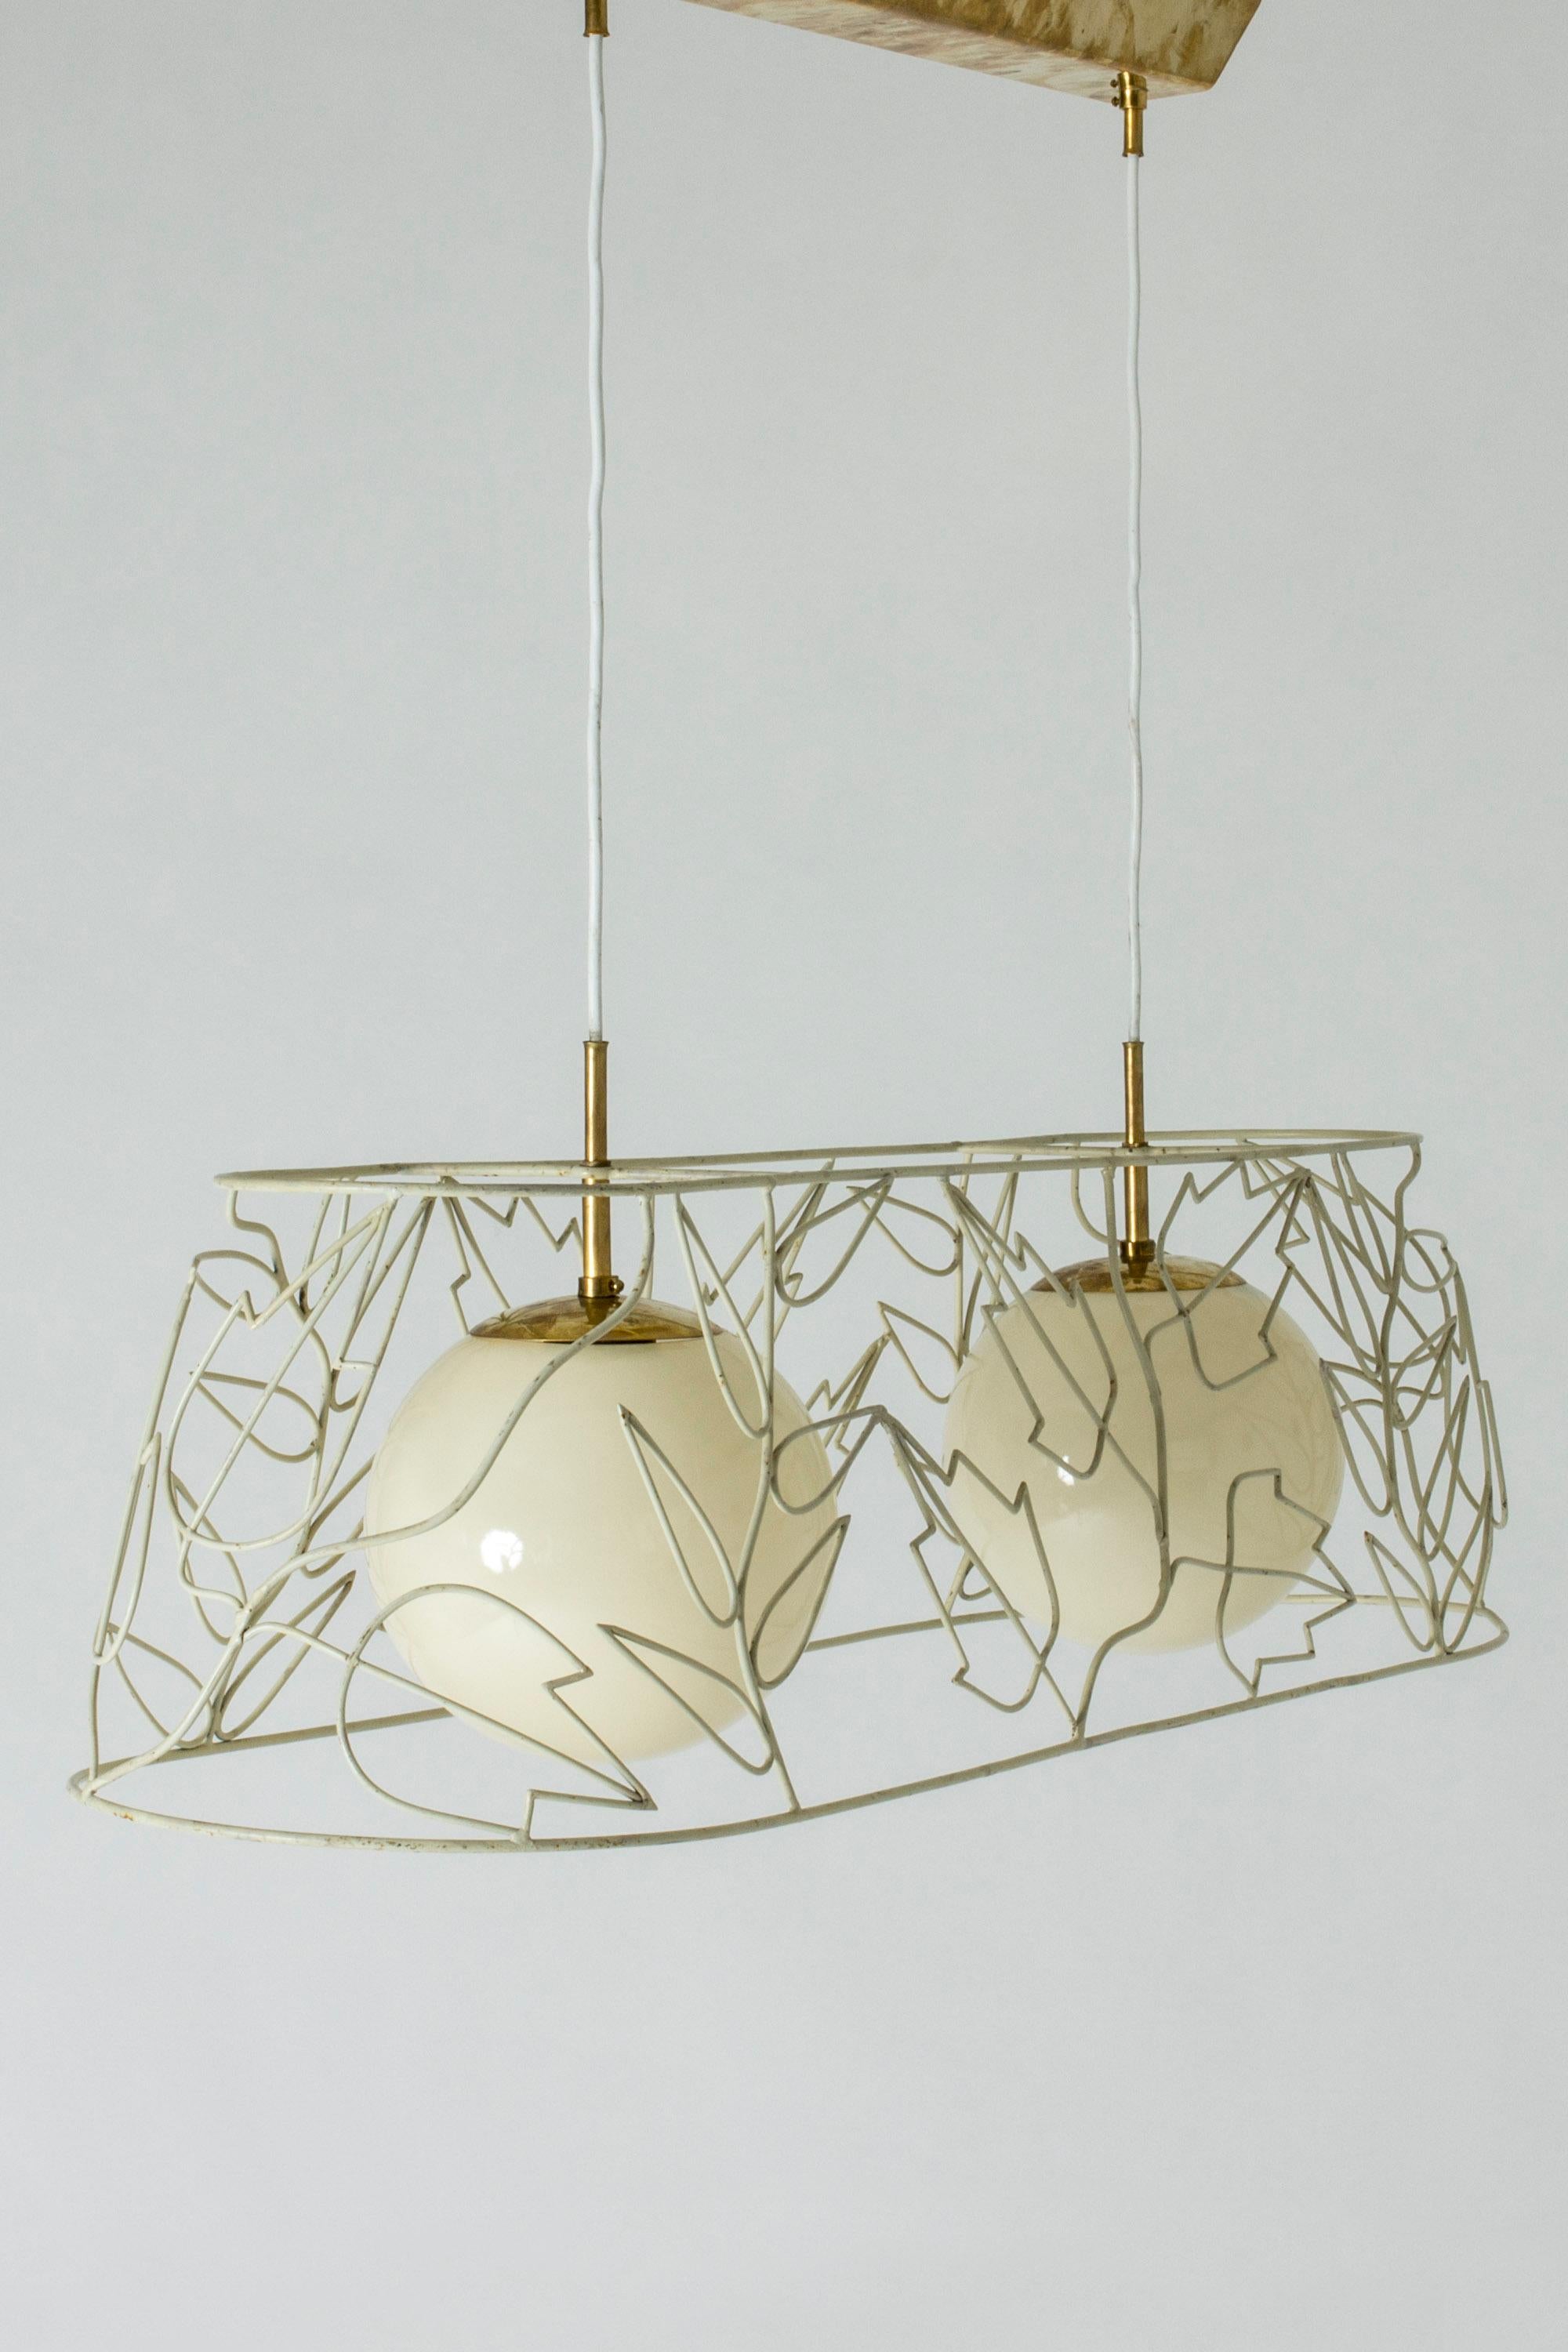 Amazing chandelier by Hans Bergström, with an elongated, airy metal frame of lacquered metal. Two globe shaped light shades inside that let out a soft glow. Beautiful pattern of flowers and leaves. Subtle brass details.